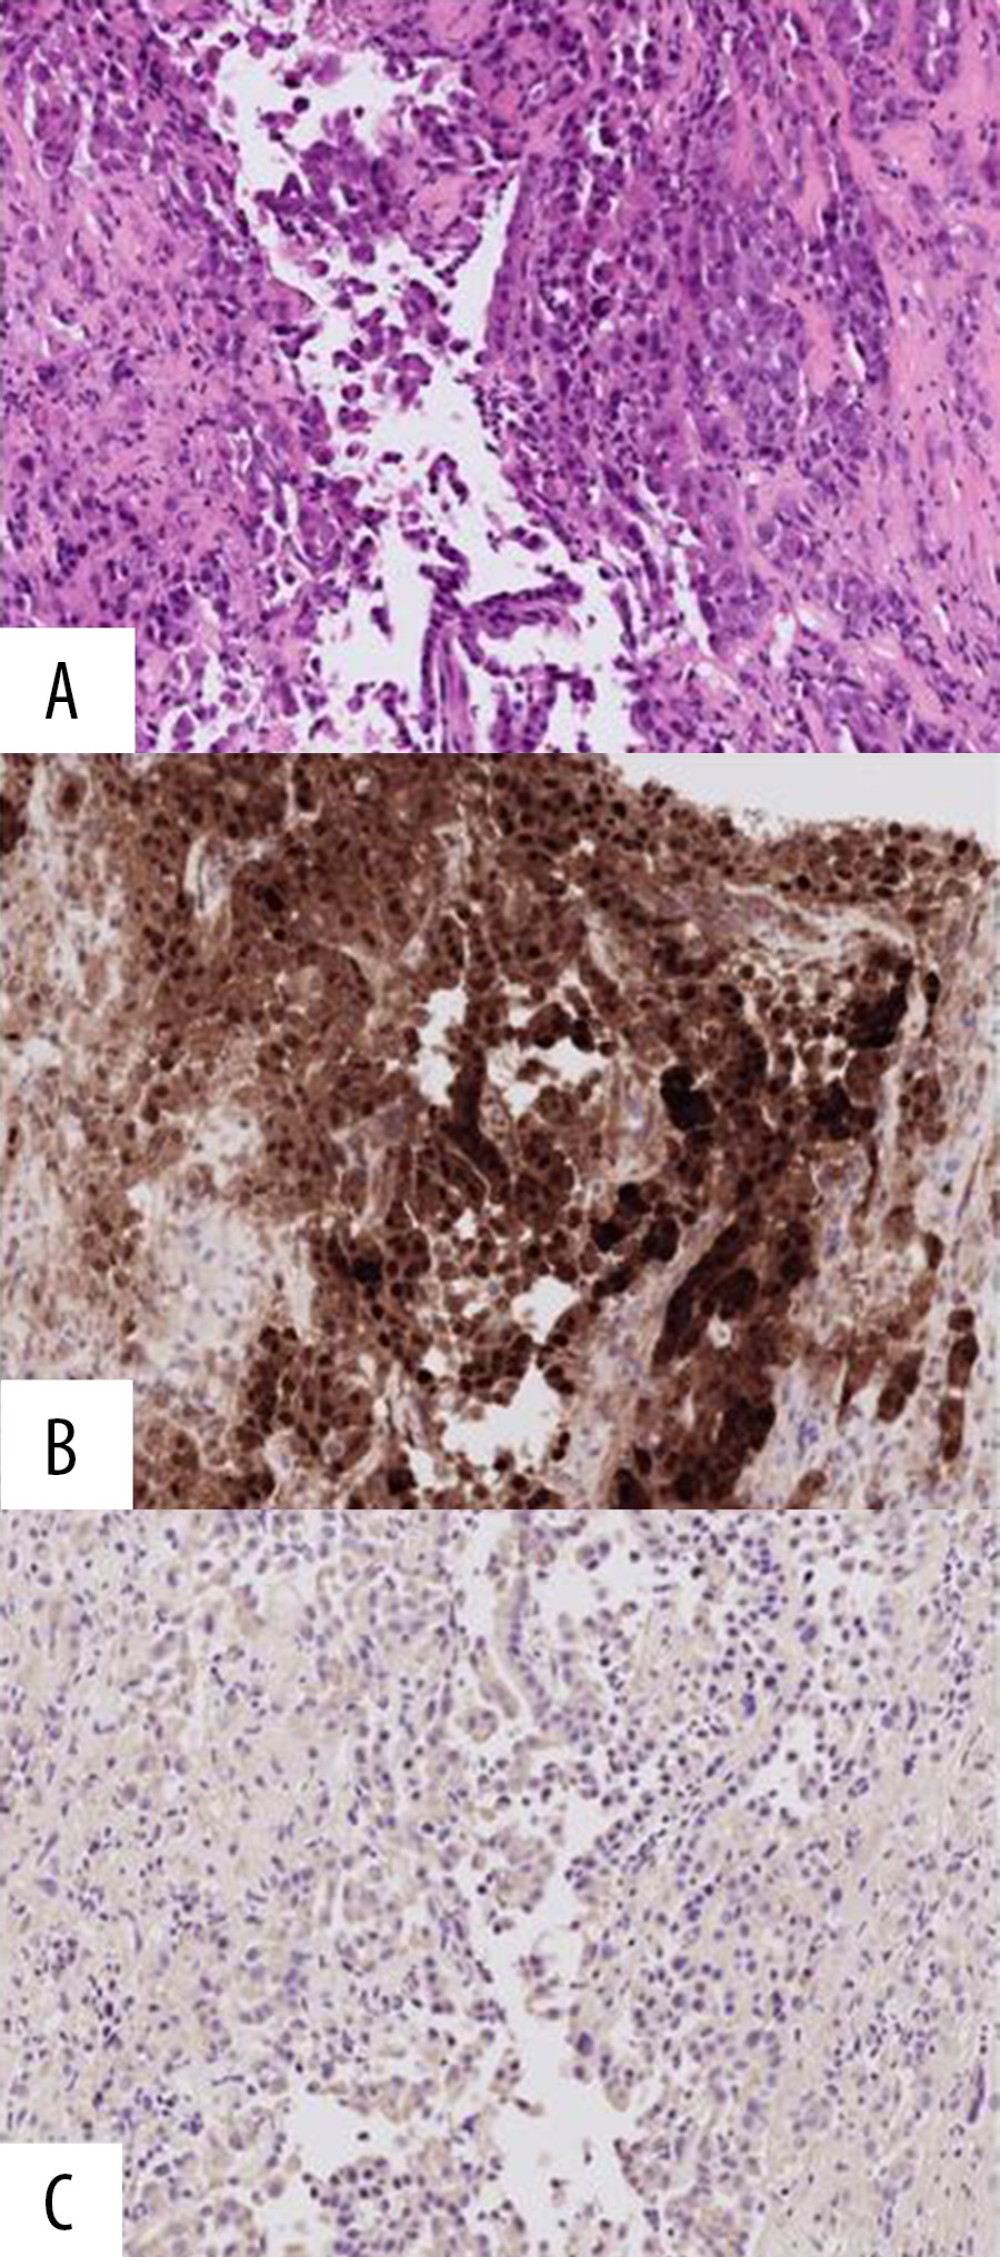 Histopathology of the pleural biopsy showing atypical mesothelial proliferation, with an immunohistochemistry panel that confirm the diagnosis of mesothelioma. (A) The hematoxylin and eosin staining shows atypical mesothelial proliferation, in keeping with an epithelioid mesothelioma (×20). (B) Immunohistochemistry panel showing positive calretinin, which confirmed the diagnosis of mesothelioma (×20). (C) Immunohistochemistry panel showing negative BerEp4, which excluded the presence of pulmonary adenocarcinoma (×20).